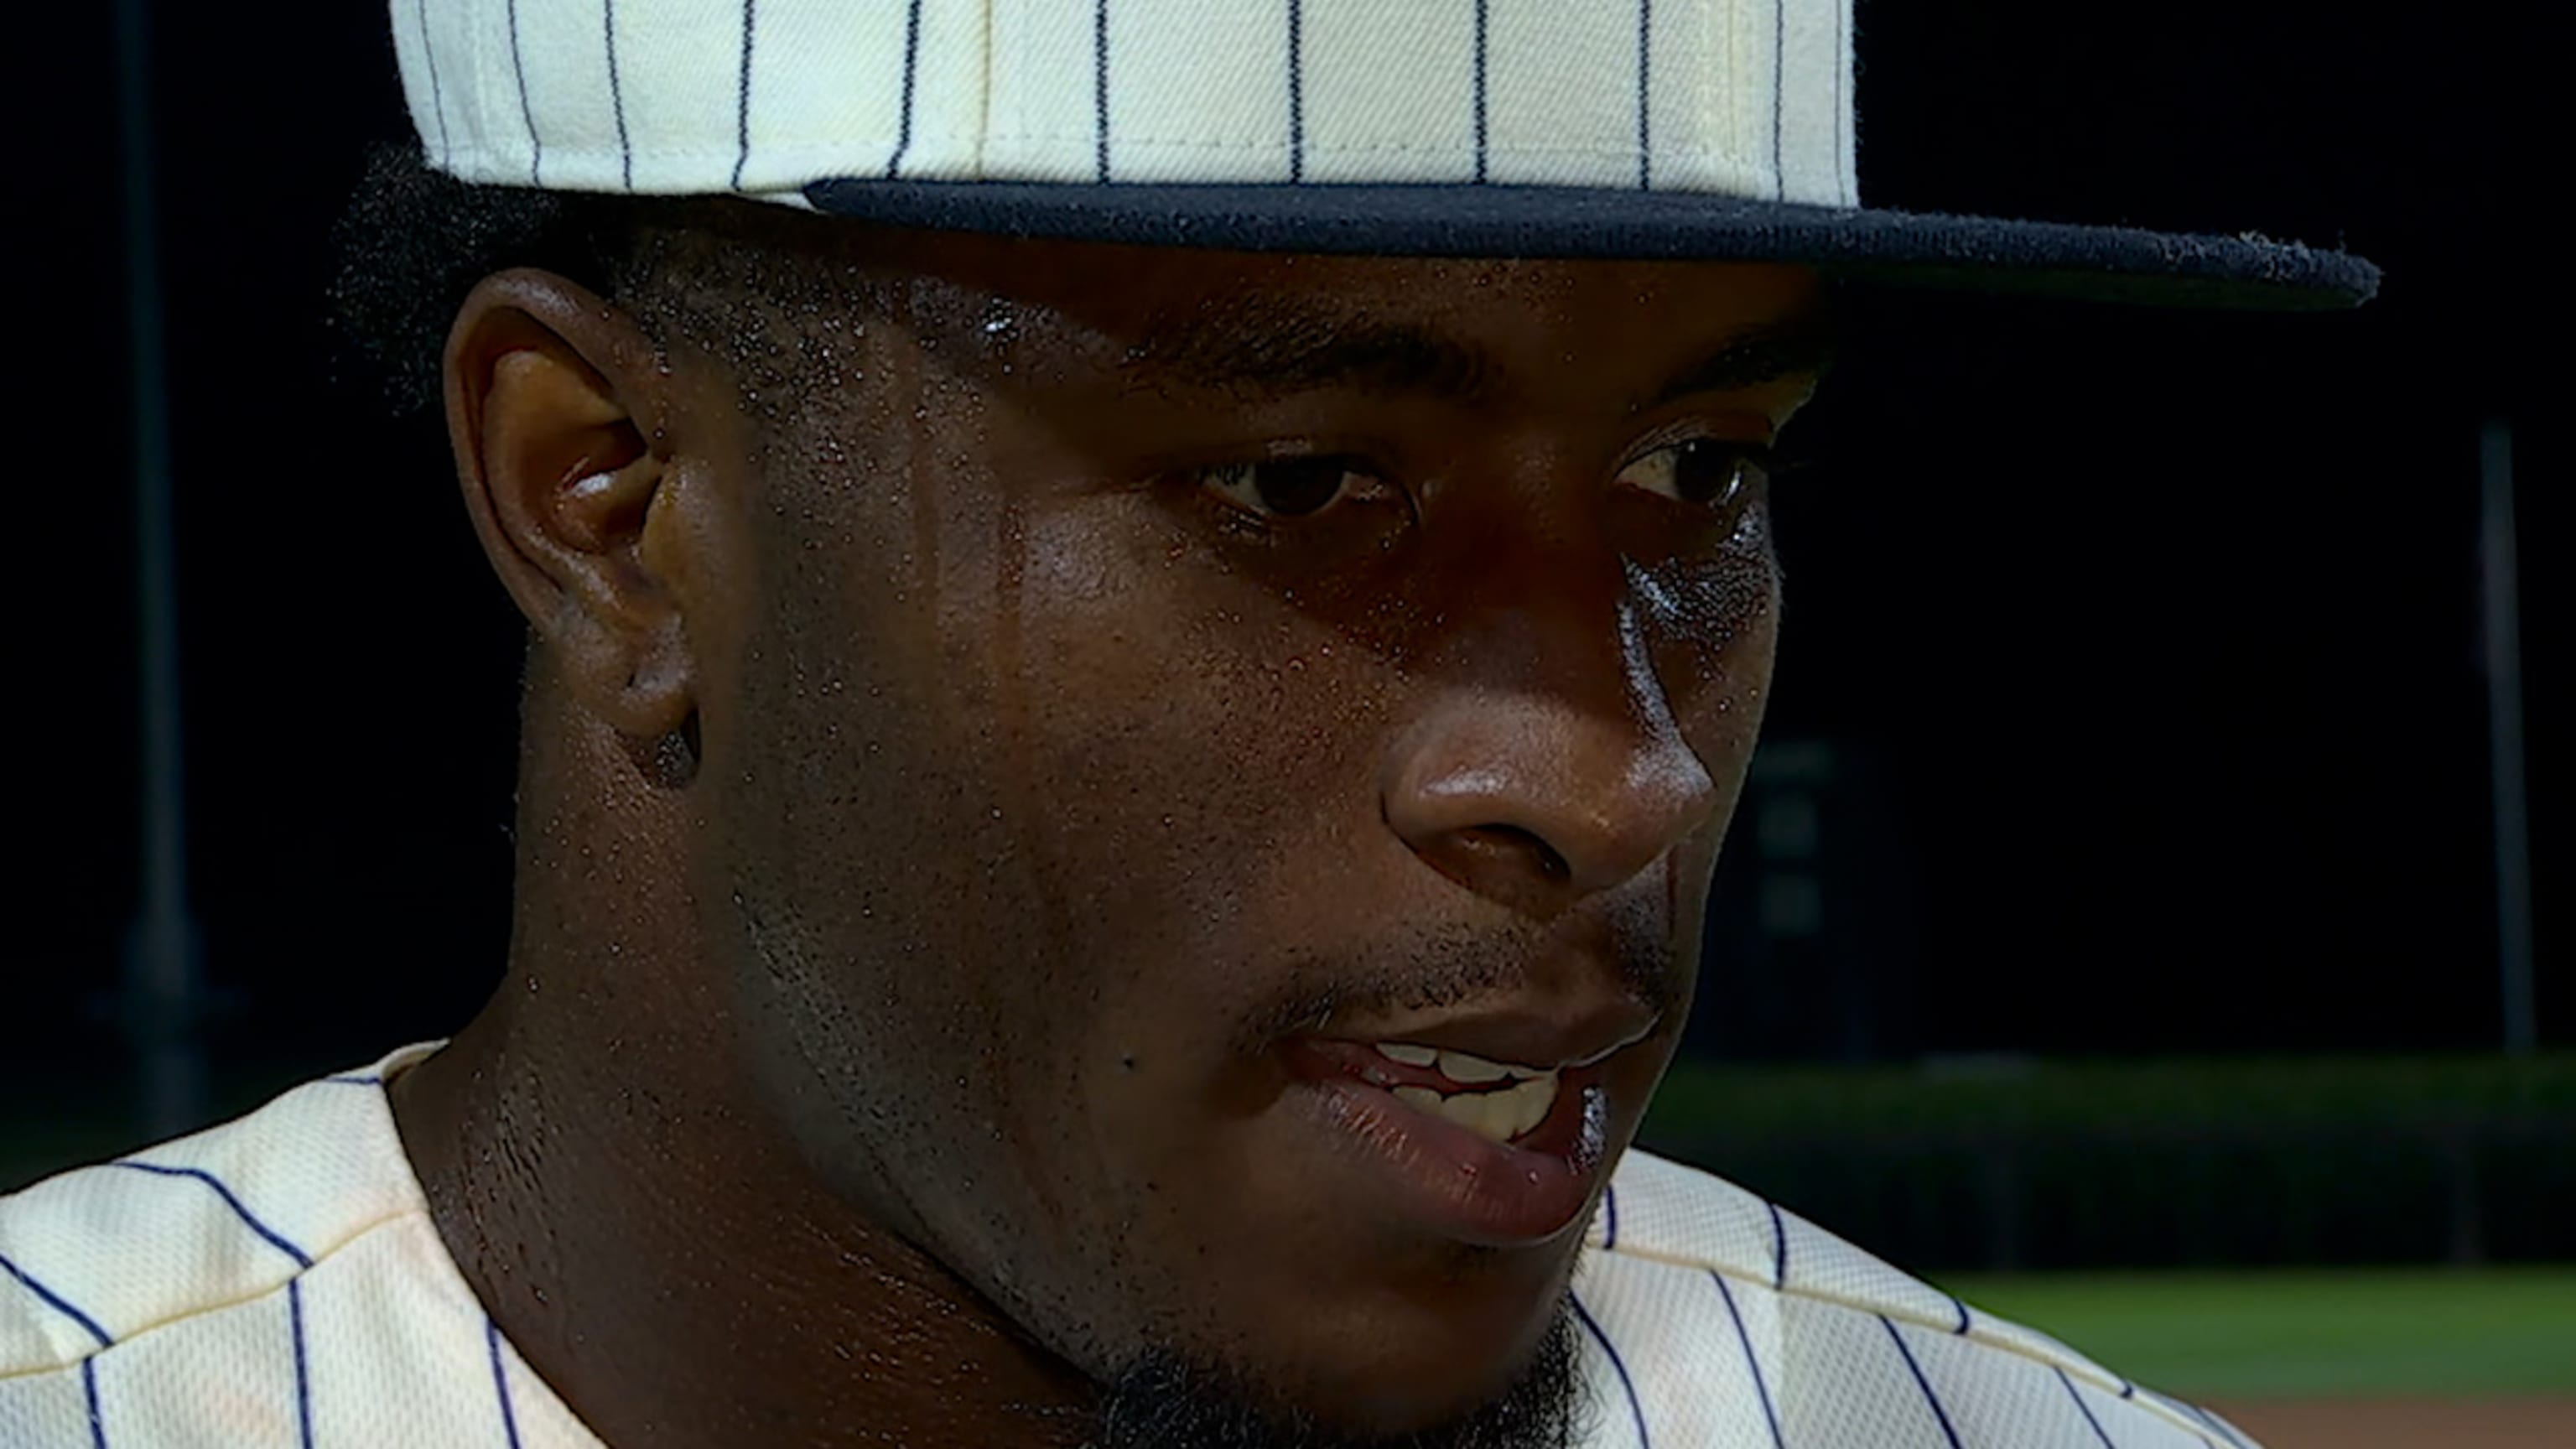 MLB Field of Dreams Game: White Sox beat Yankees as Tim Anderson